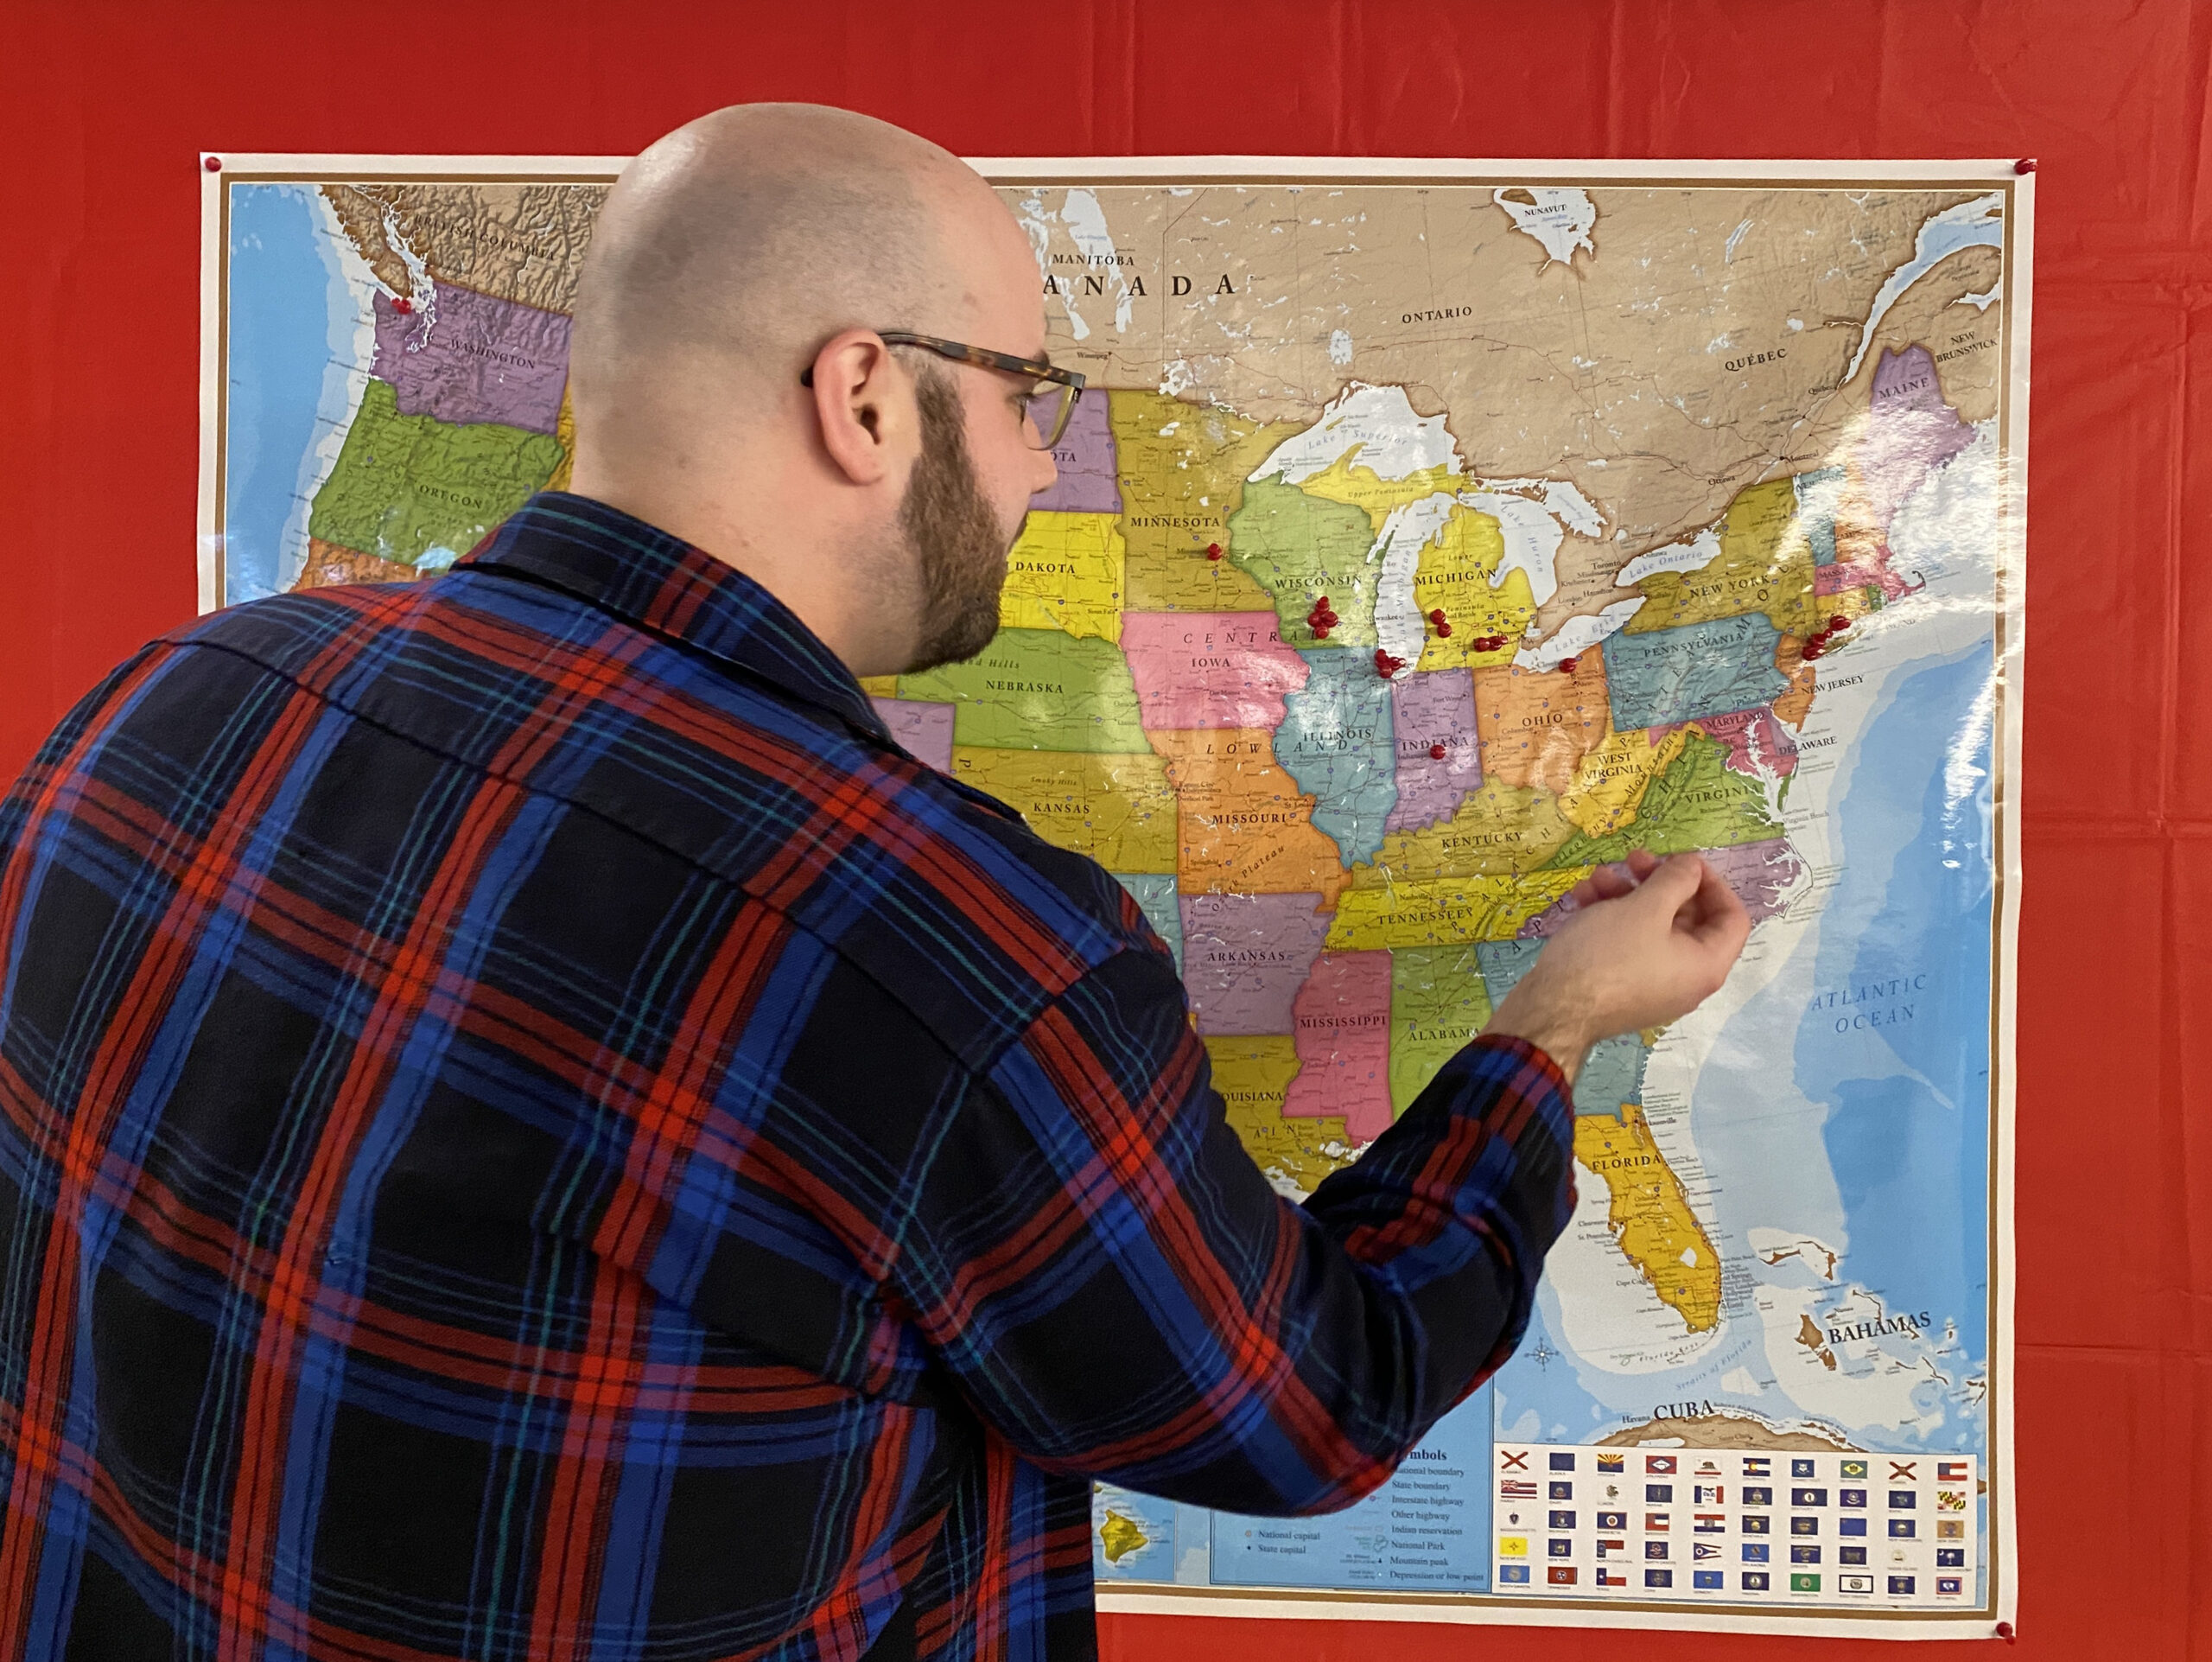 Trevor Cooper, UW School of Medicine Class of 2022, adds a pushpin to the bulletin board to indicate where he will be completing his residency — OB-GYN at Mountain Area Health Education Center in Asheville, N.C.